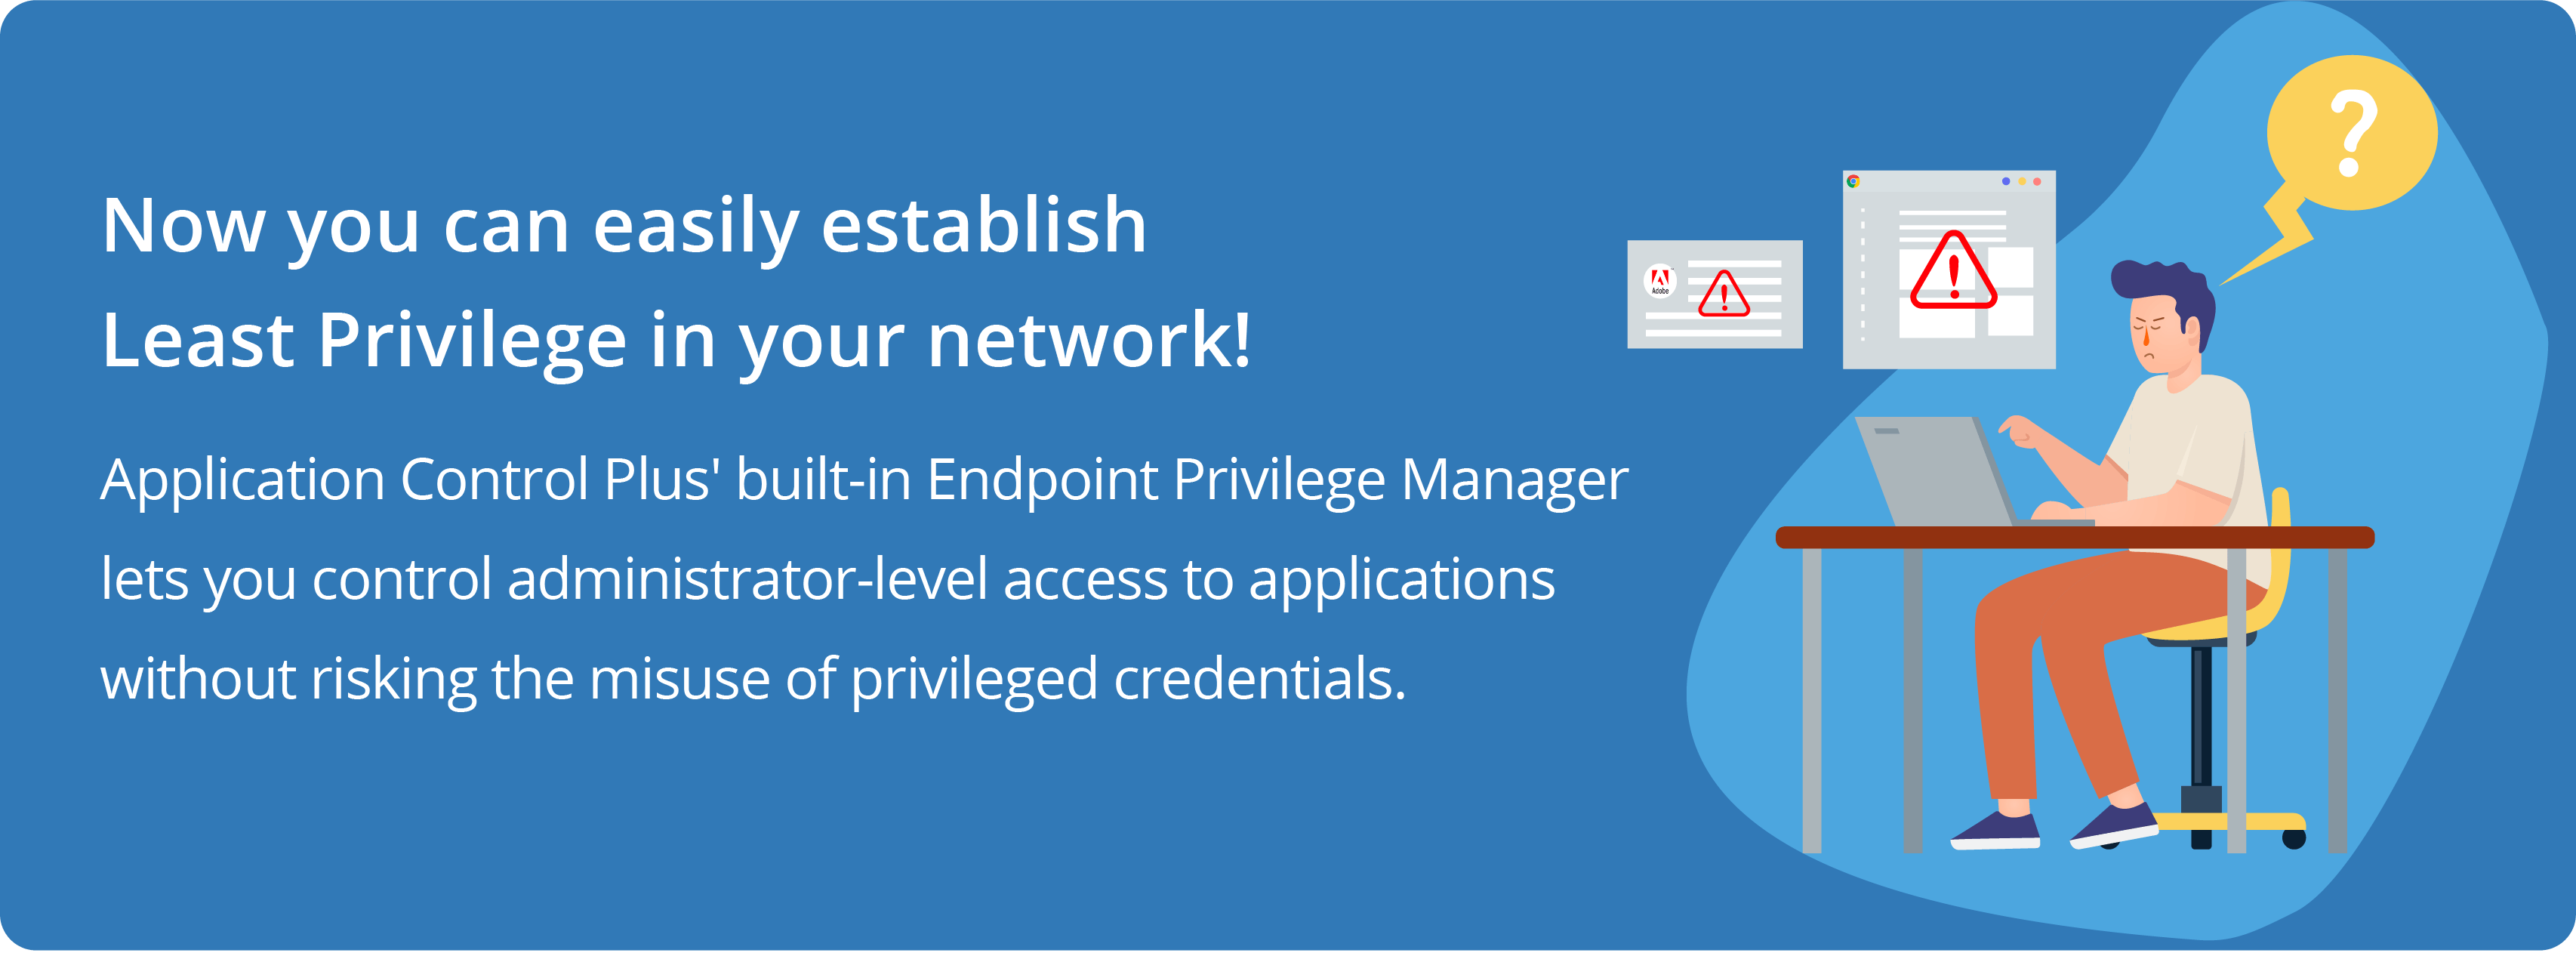 Endpoint Privilege Manager